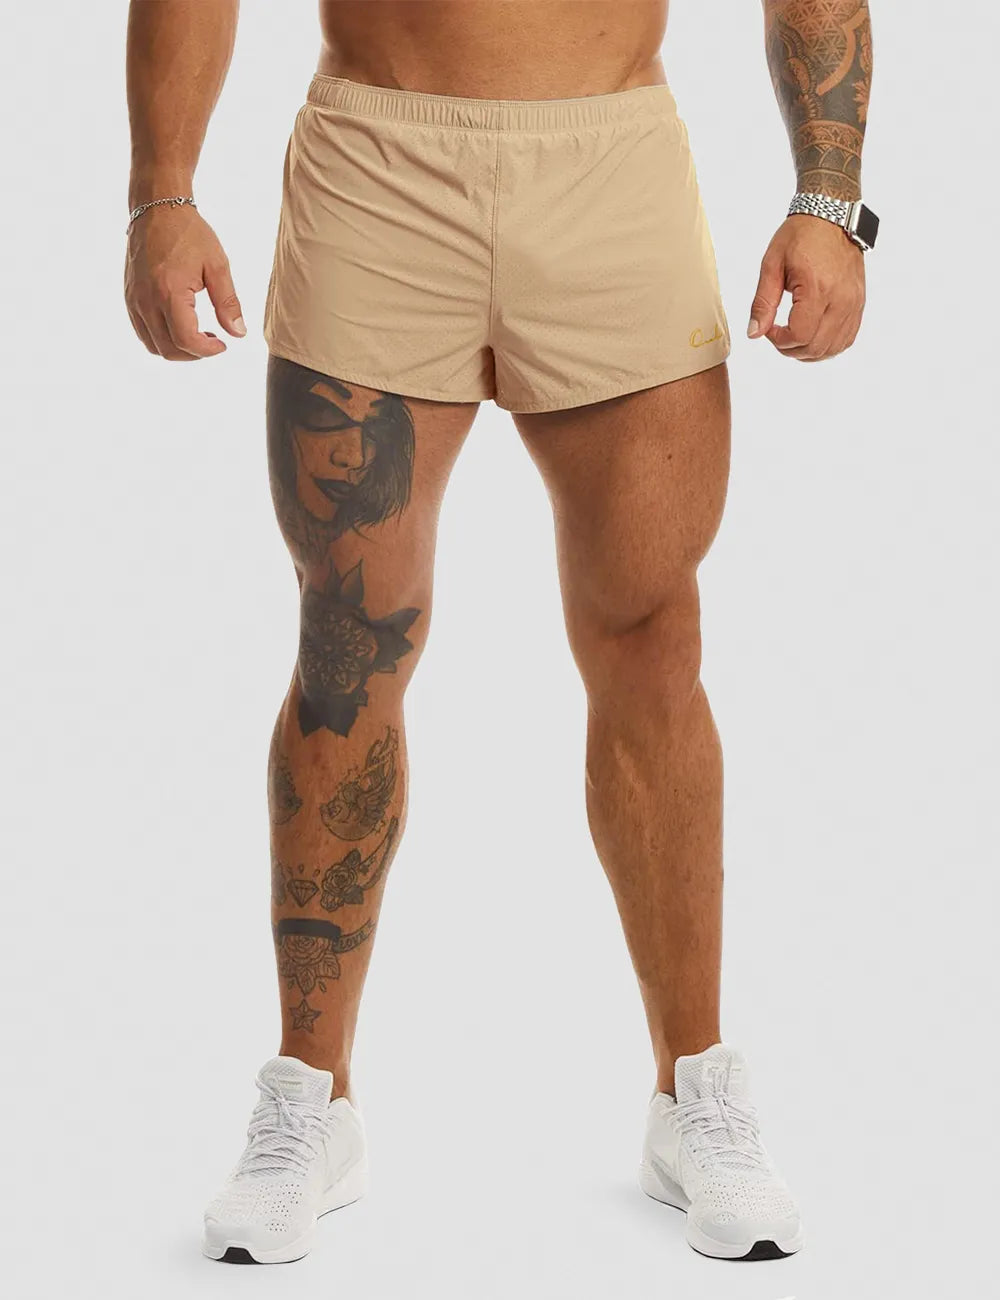 OUBER-Workout2-IN-1Shorts-Beige_1.webp